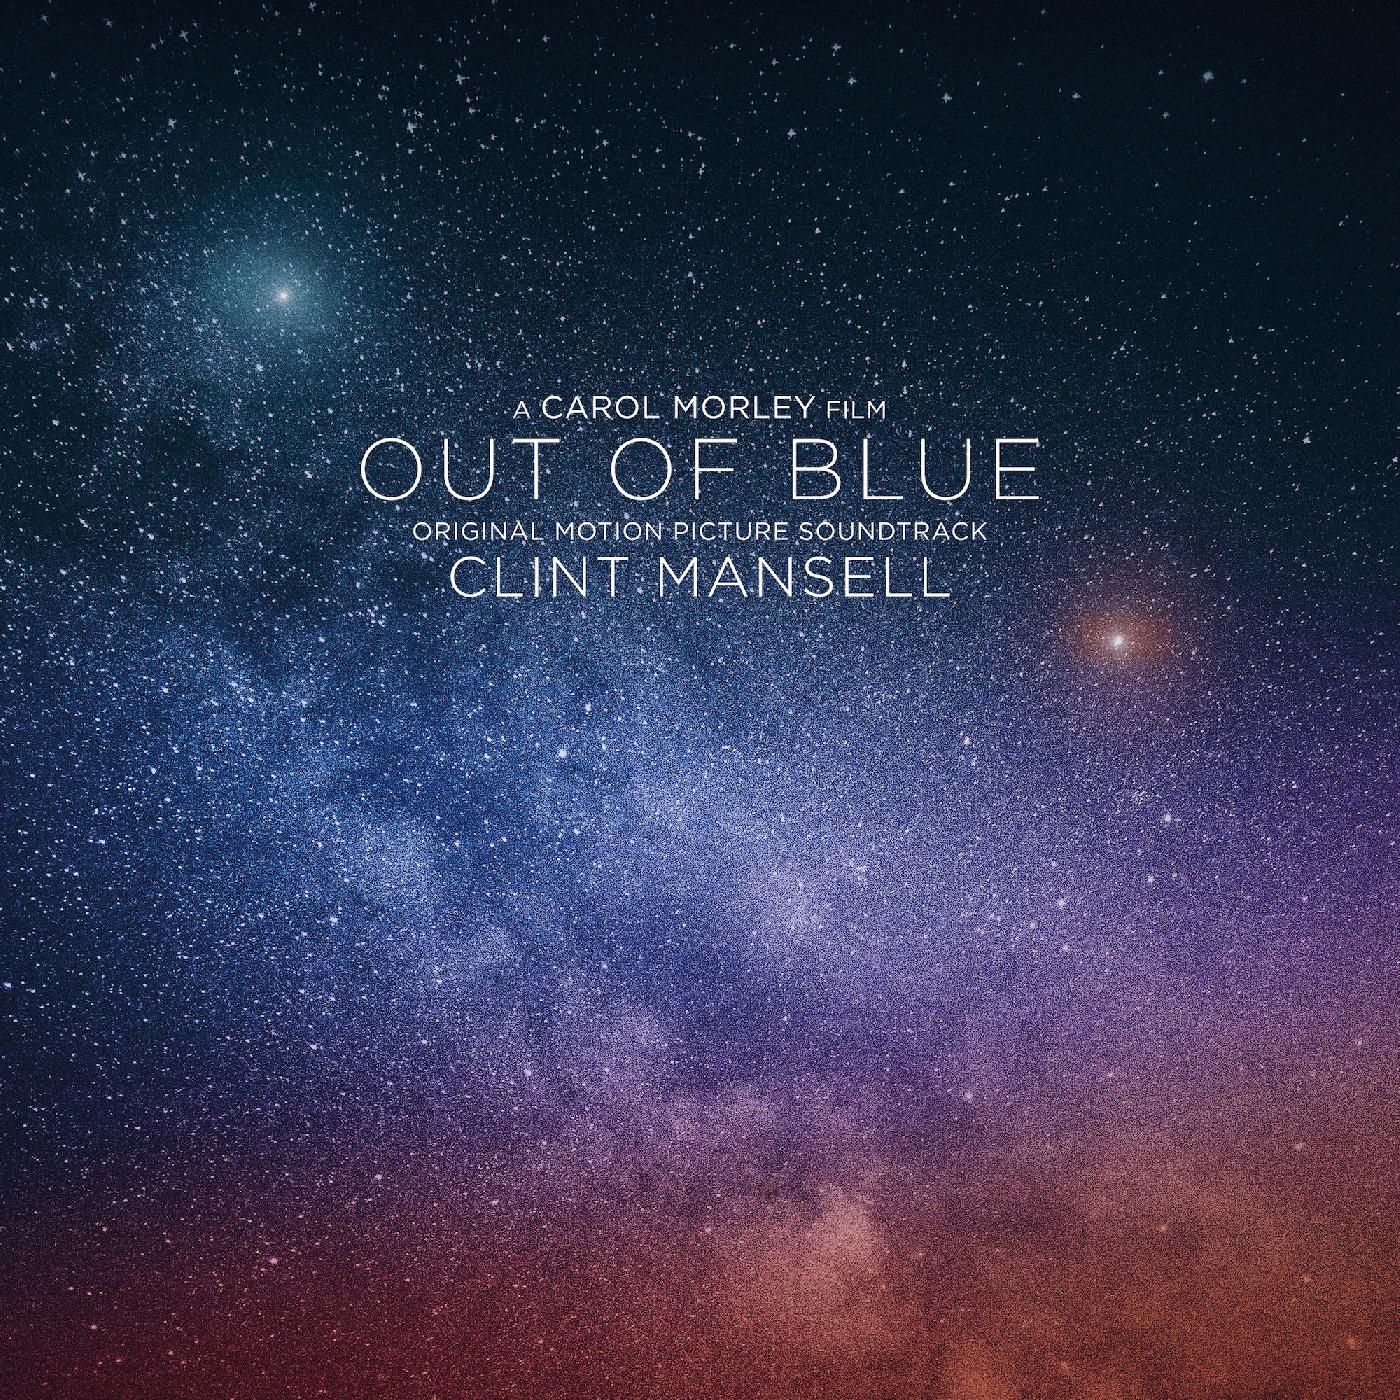 Clint Mansell - Out Of Blue (Original Motion Picture Soundtrack) (Vinyl)